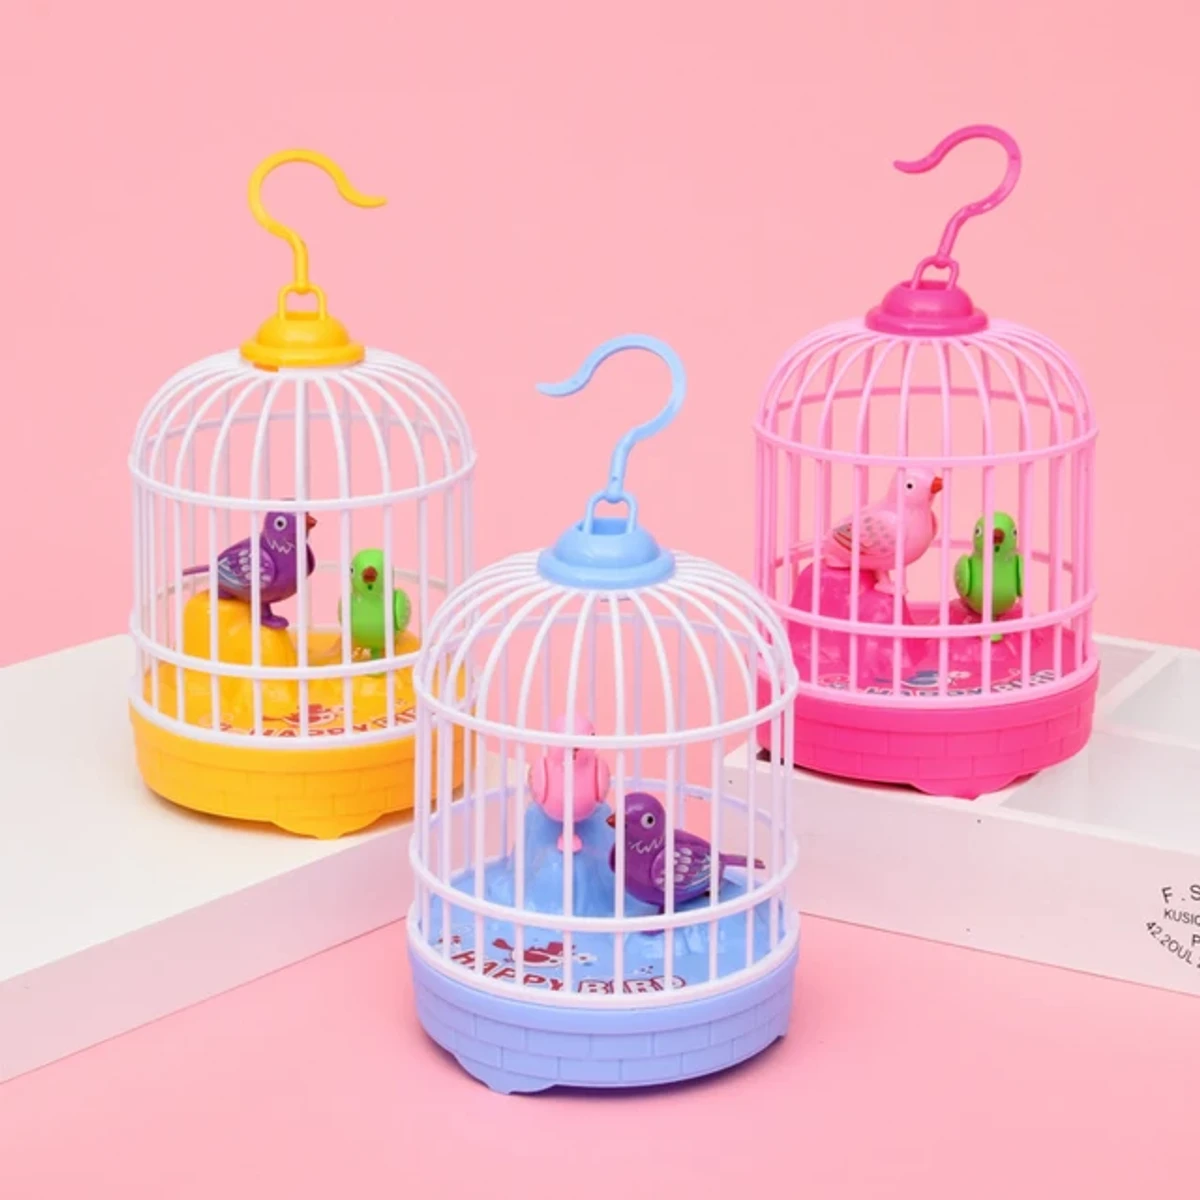 Talking Birds Toy Rechargeable Talking and Chirping Birds for Kids with Charger Cable